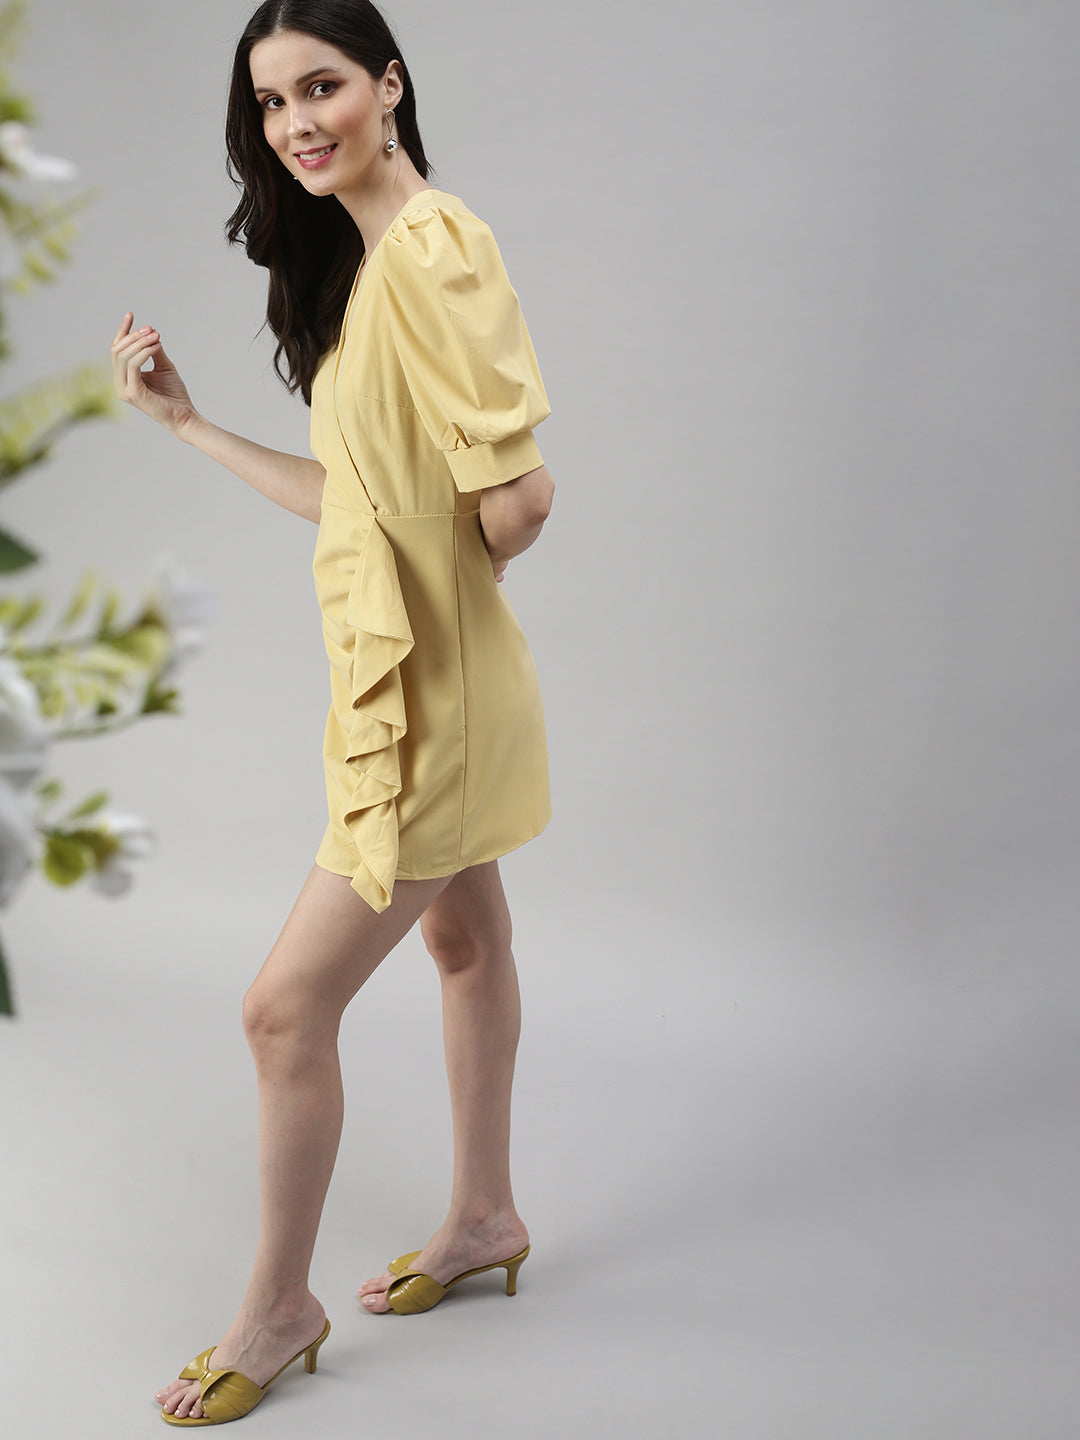 Women V-Neck Solid Fit and Flare Yellow Dress